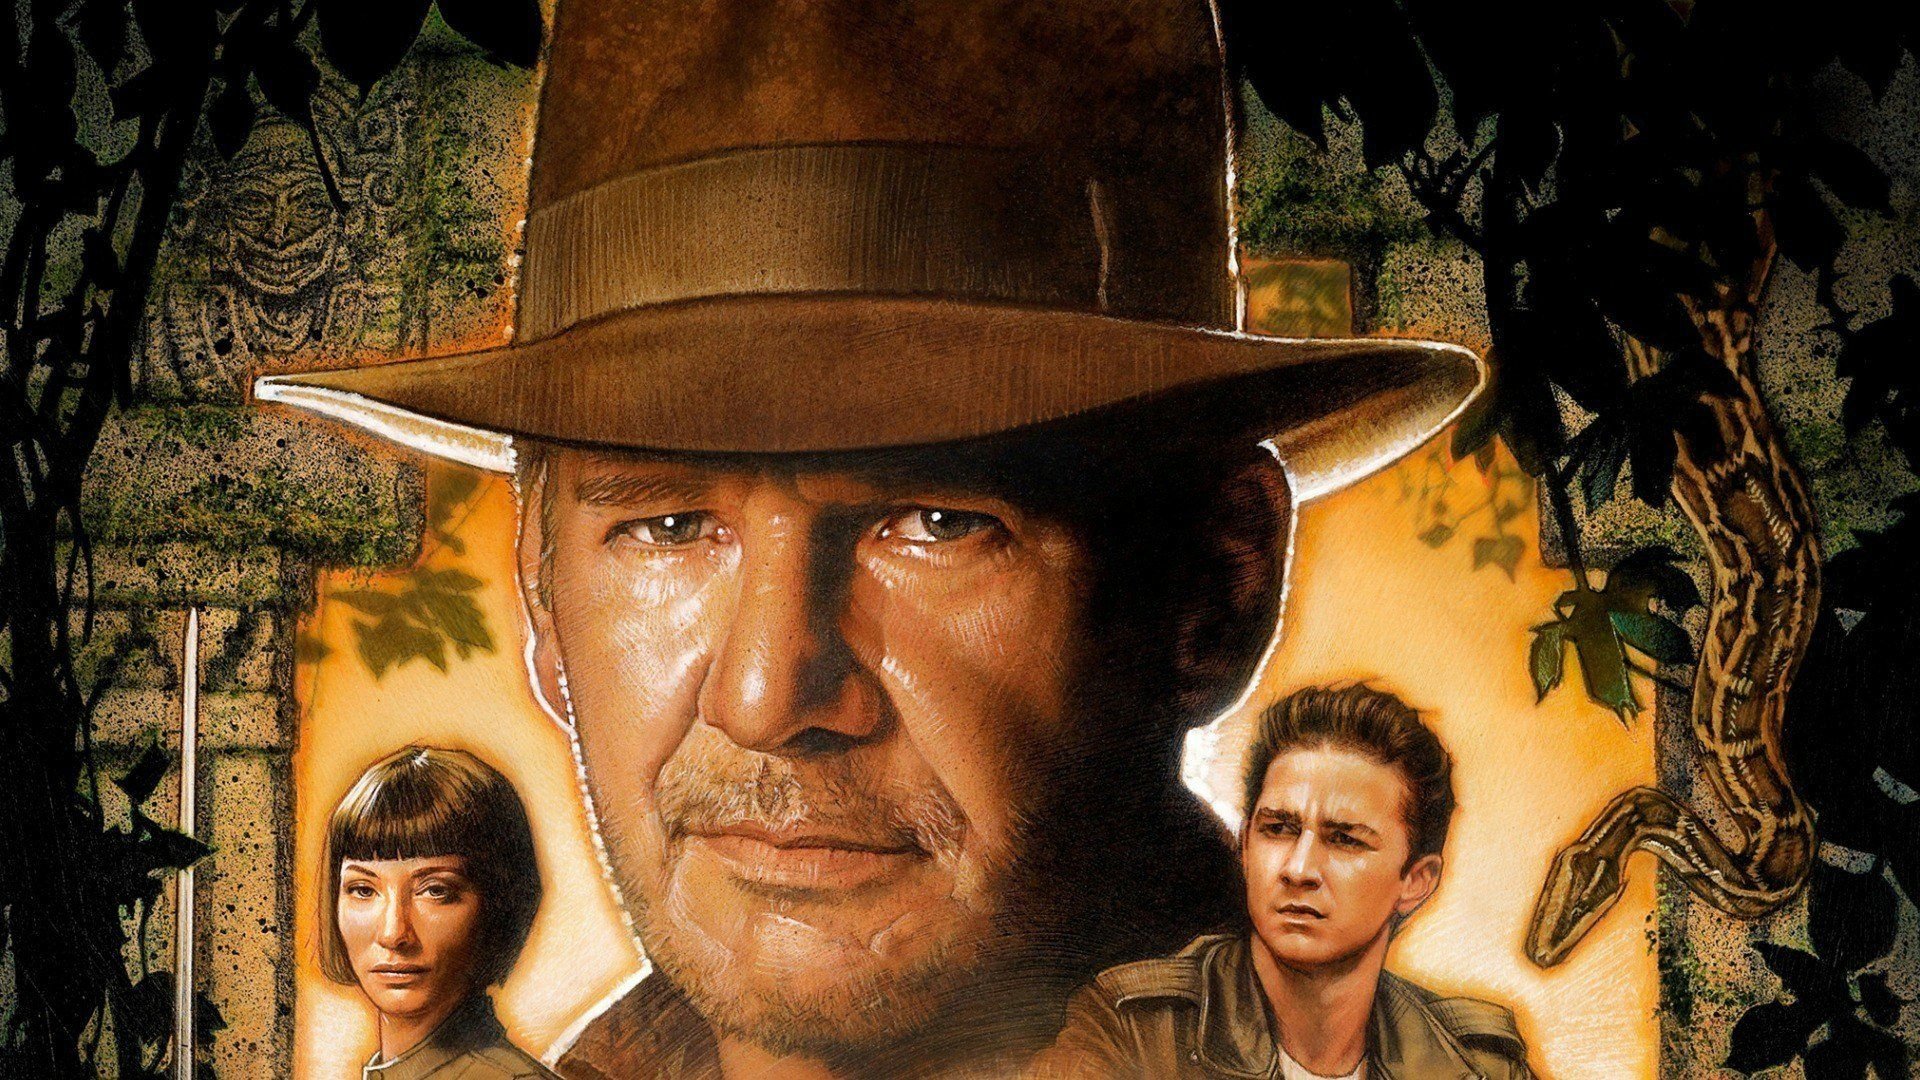 Best Indiana Jones And The Kingdom Of The Crystal Skull background ID:294996 for High Resolution 1080p desktop